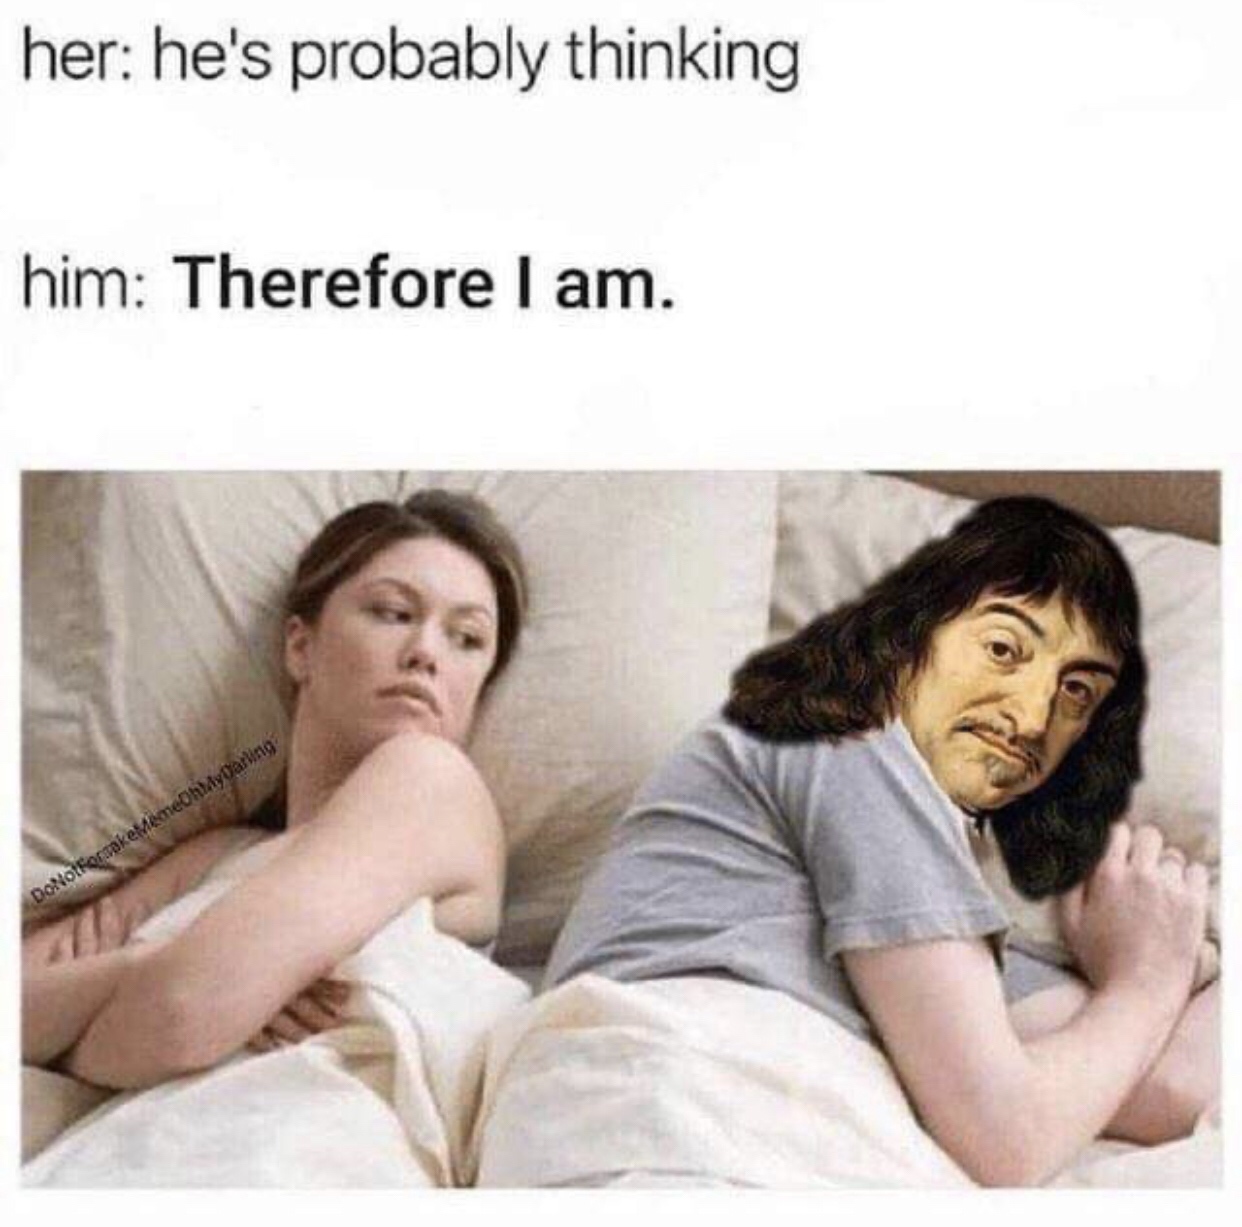 philosophy memes - her he's probably thinking him Therefore I am. DoNotForsakeMemeChlayDarling